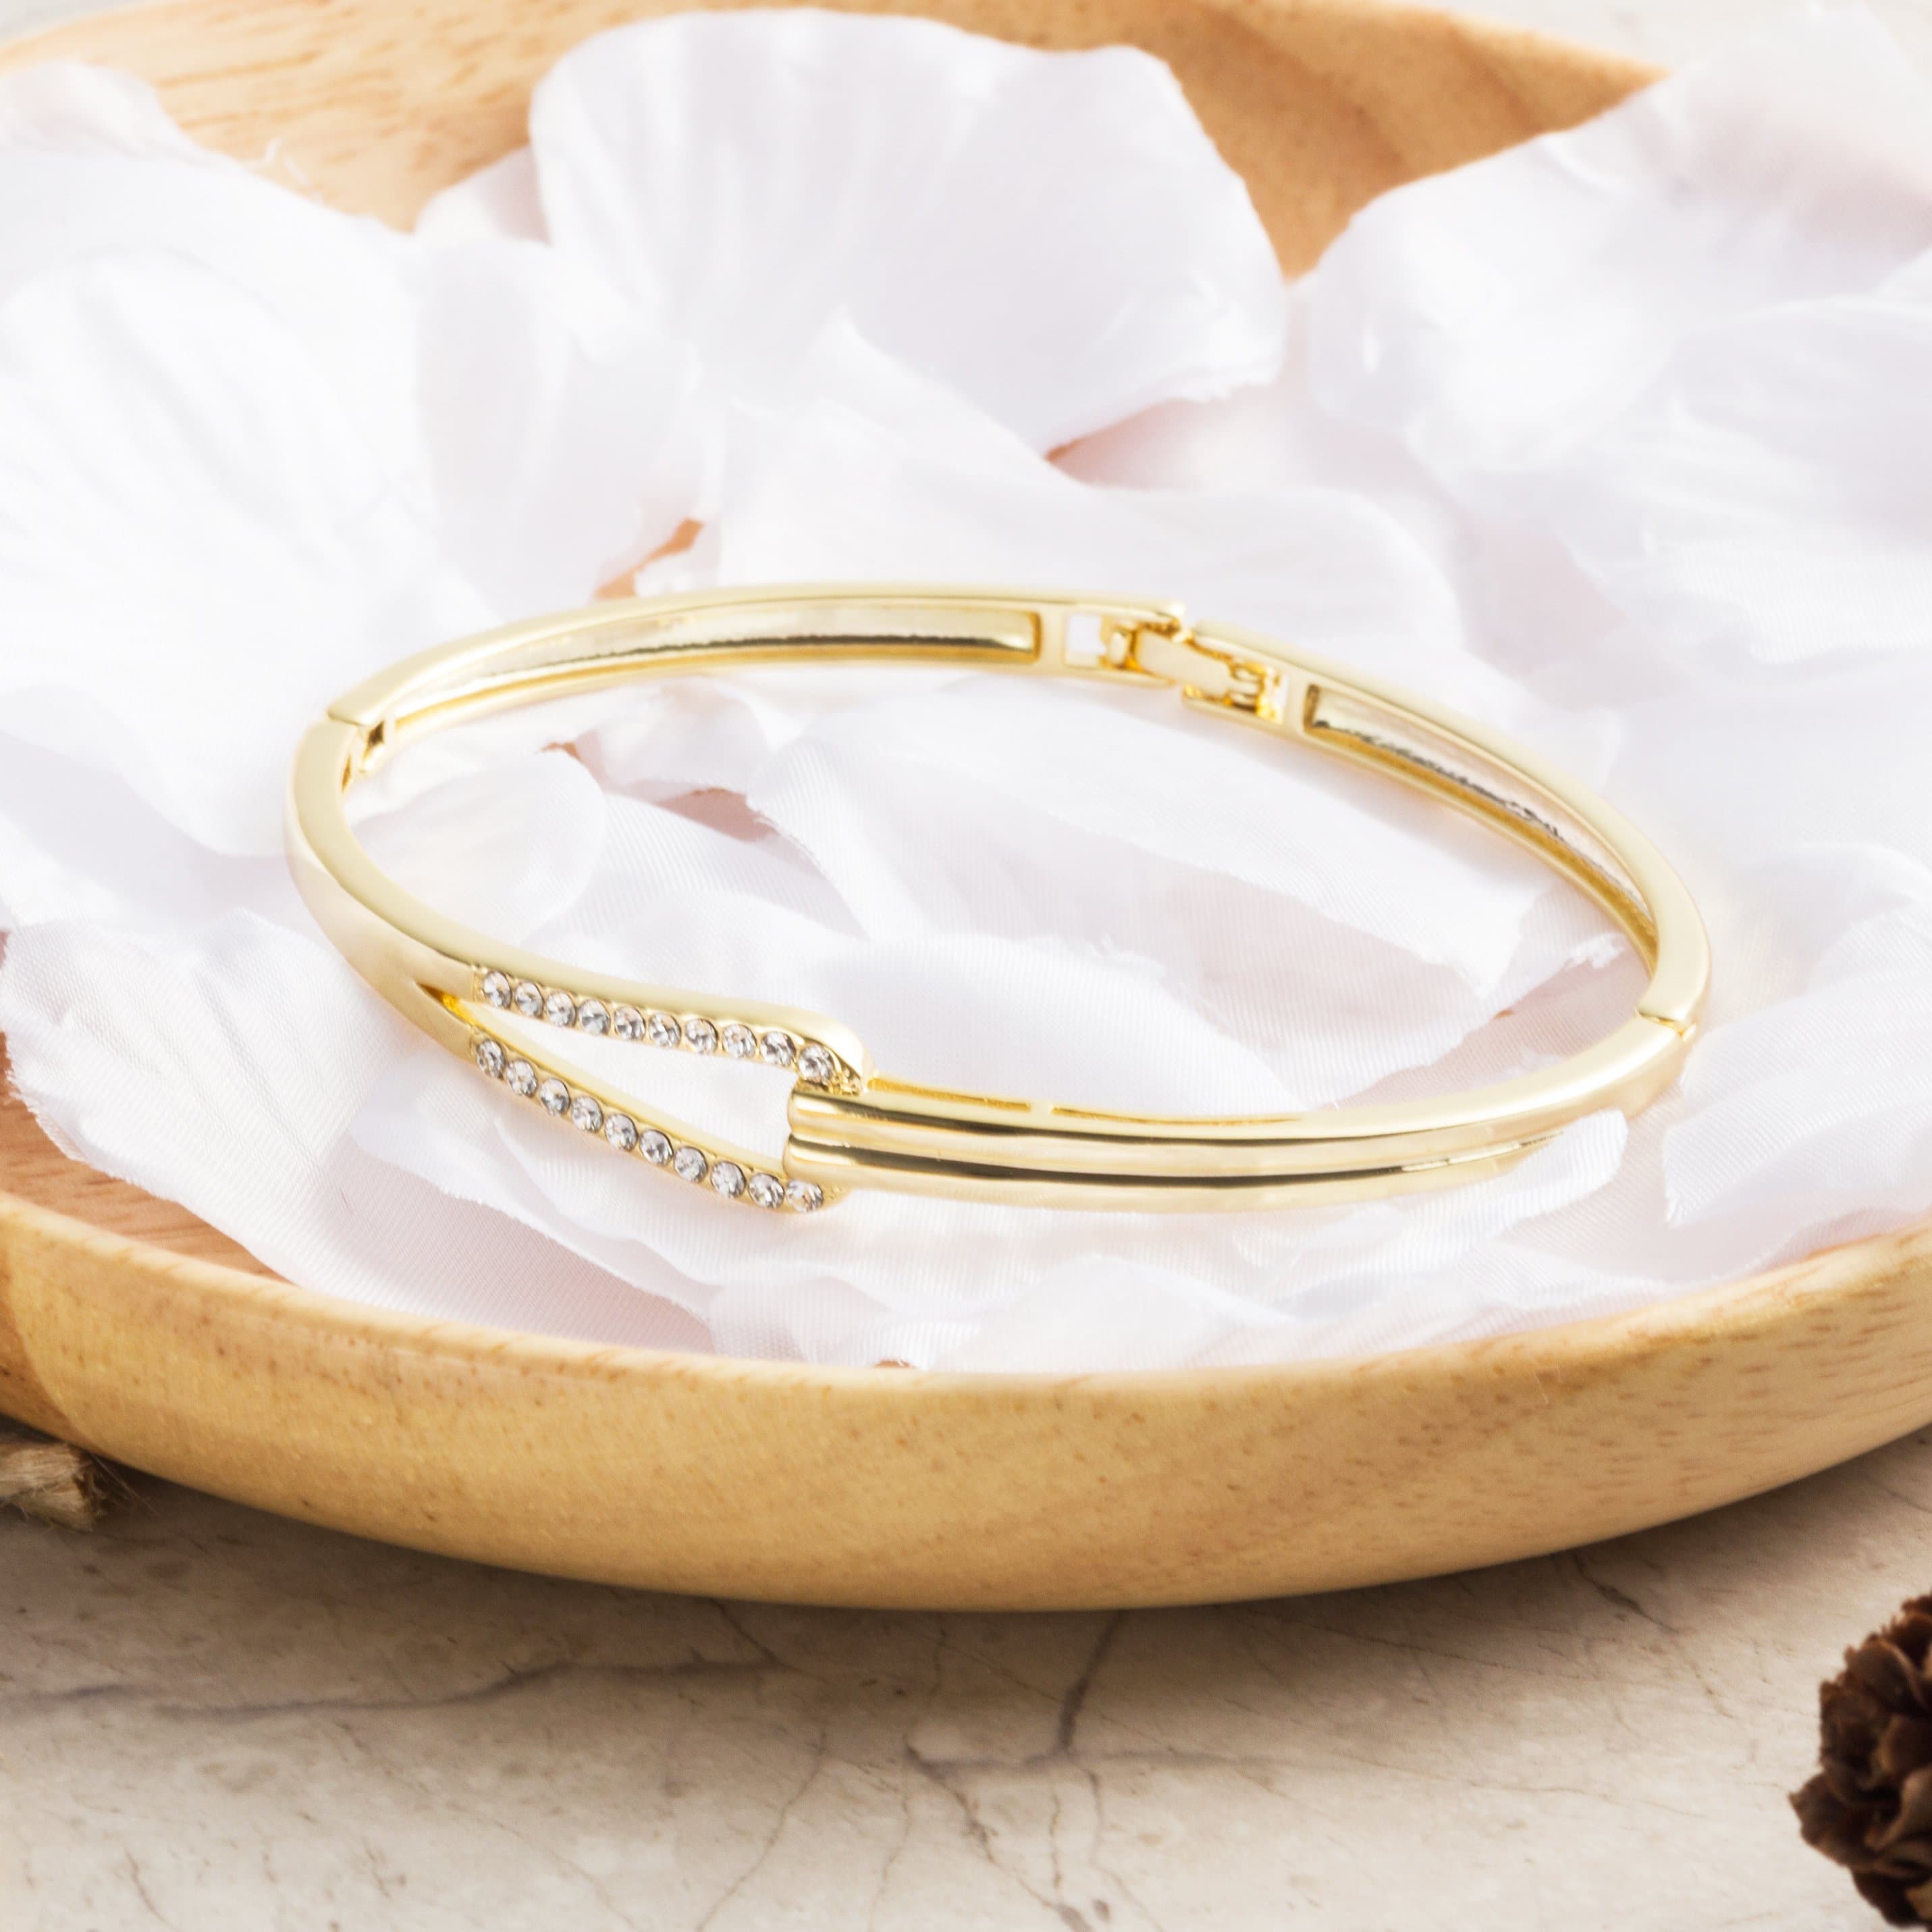 Gold Plated Link Bangle Created with Zircondia® Crystals